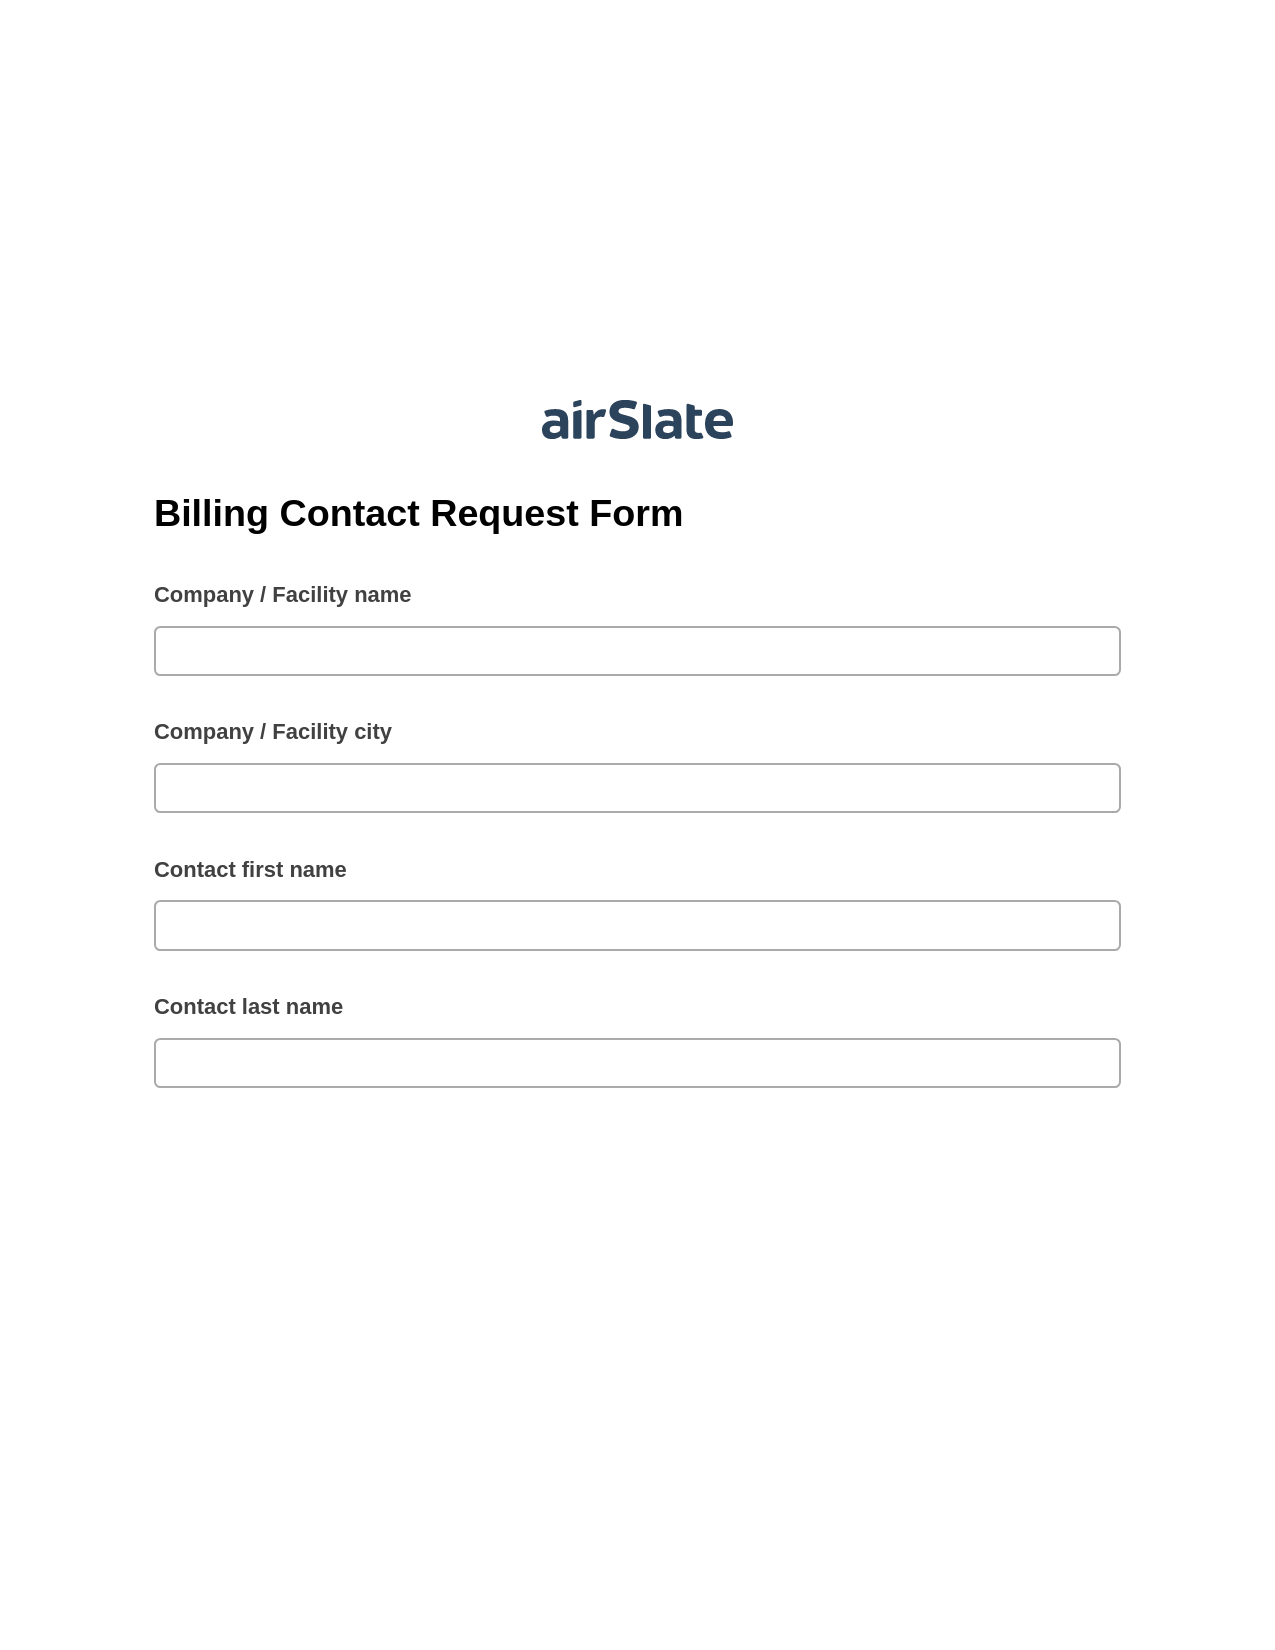 Billing Contact Request Form Pre-fill Document Bot, Create MS Dynamics 365 Records Bot, Archive to SharePoint Folder Bot